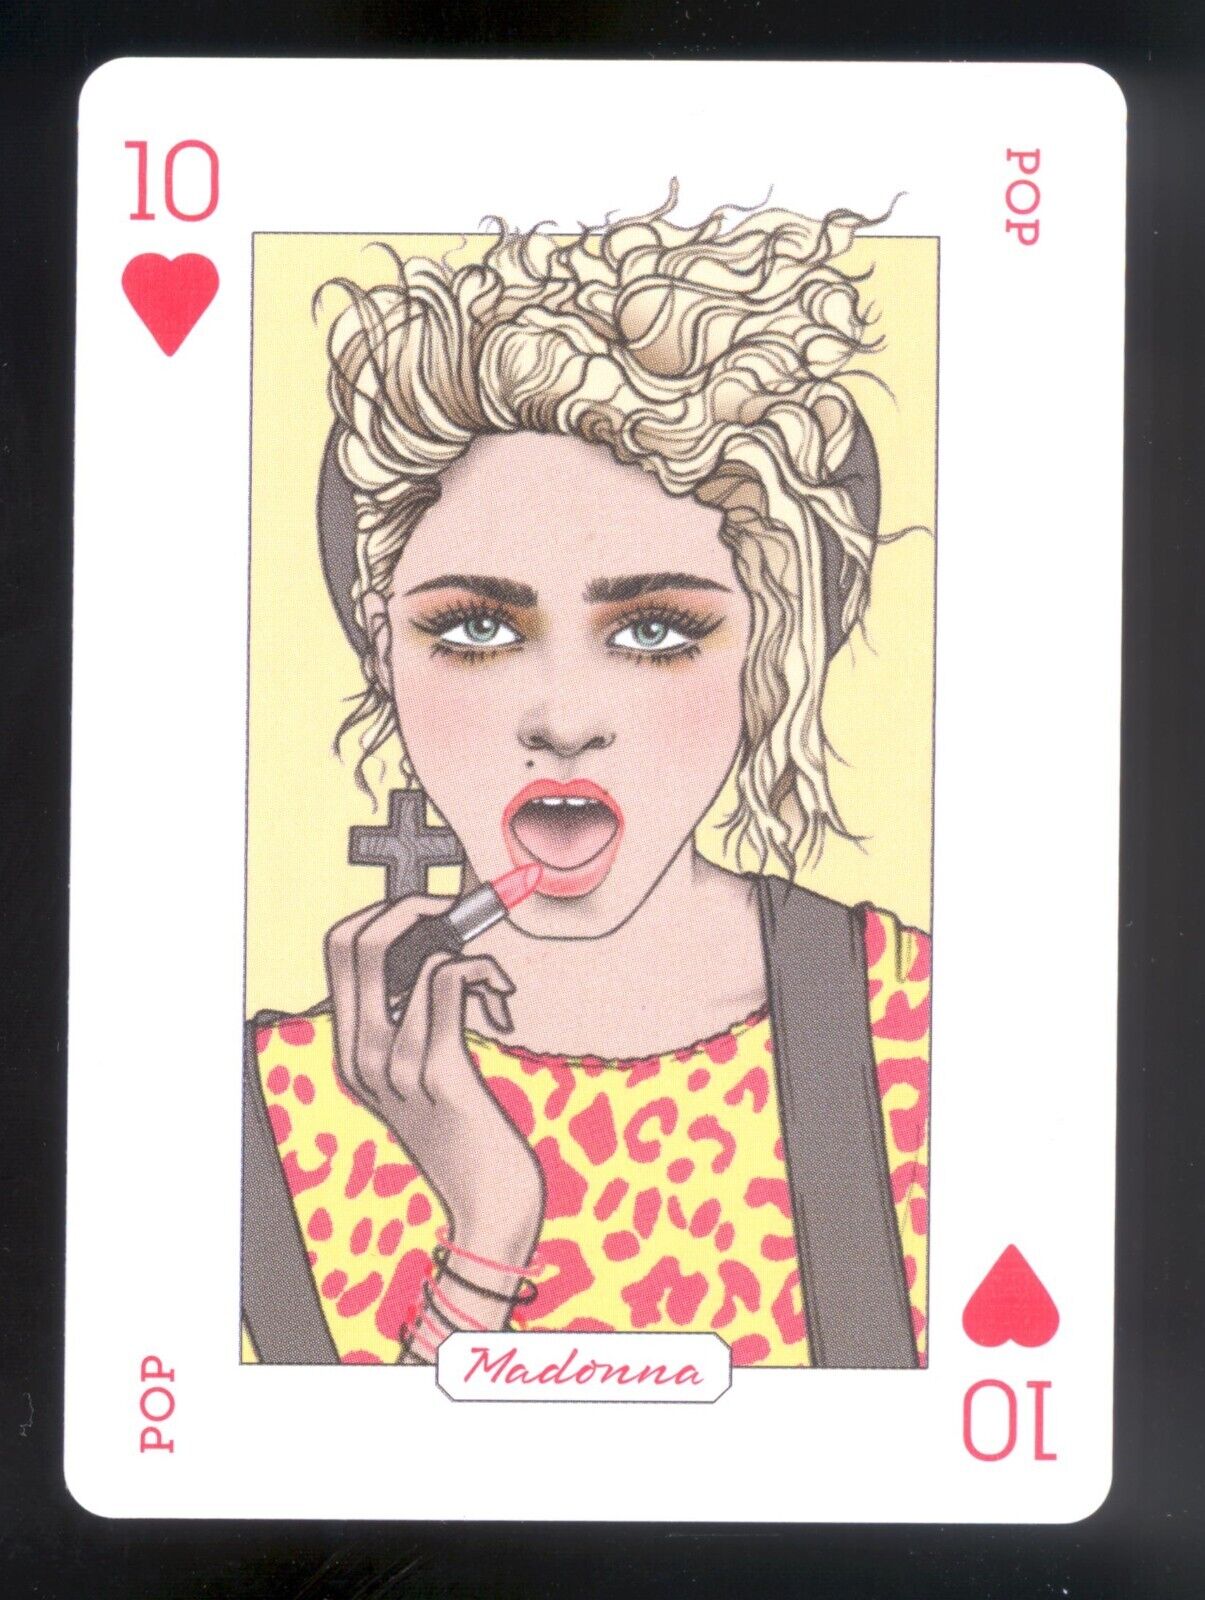 Madonna Music Genius Playing Trading Card 2018 Mint Condition